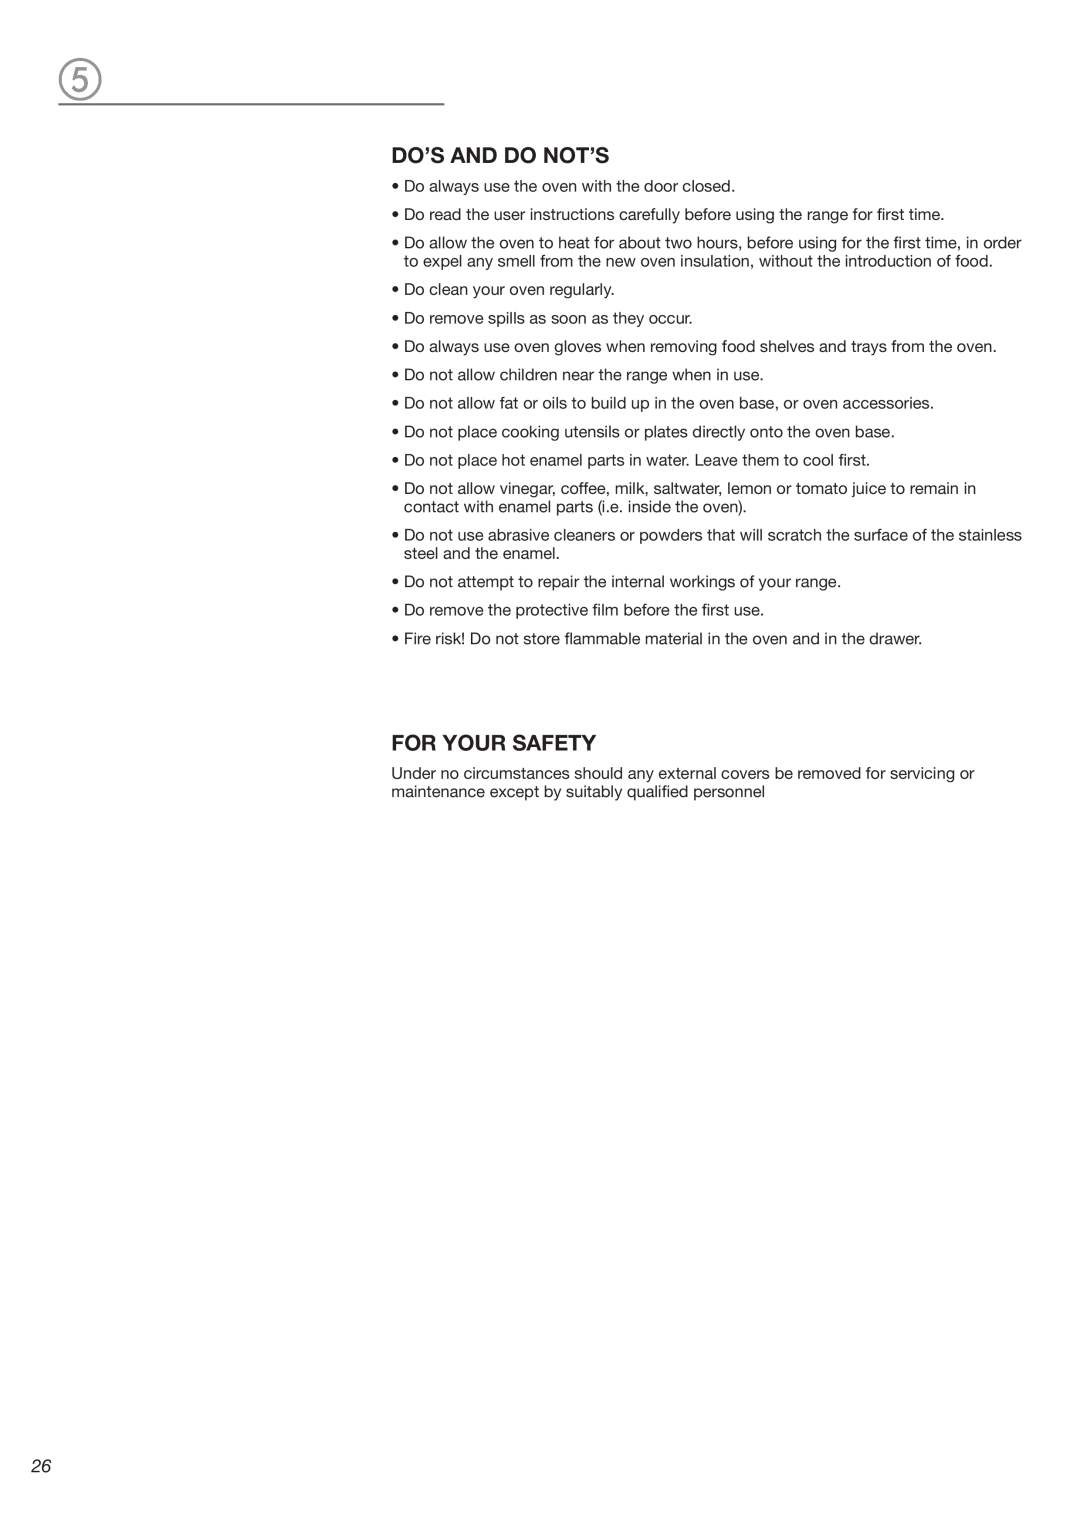 Avanti DGE 2403 SC warranty Do’S And Do Not’S, For Your Safety 